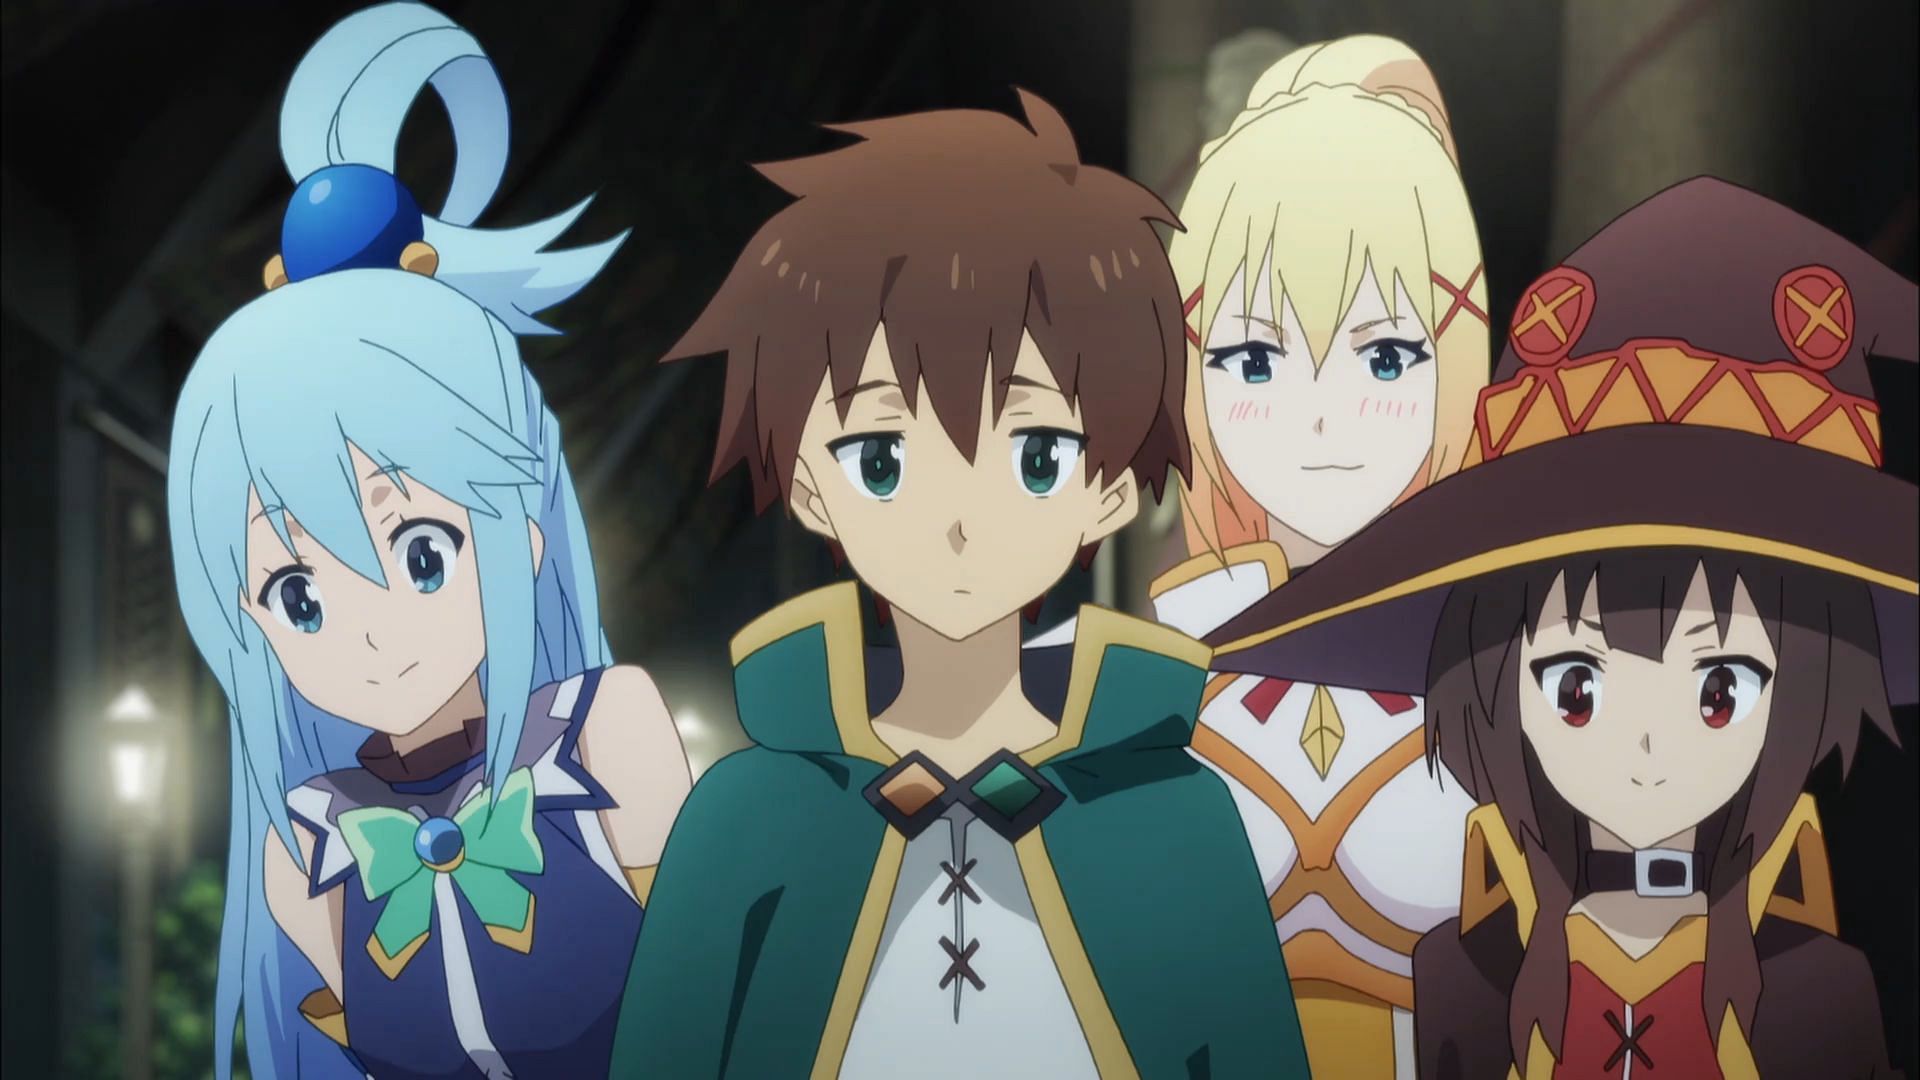 The rest of Kazuma&#039;s party comes to collect him in Konosuba season 3 episode 3 (Image via Deen)